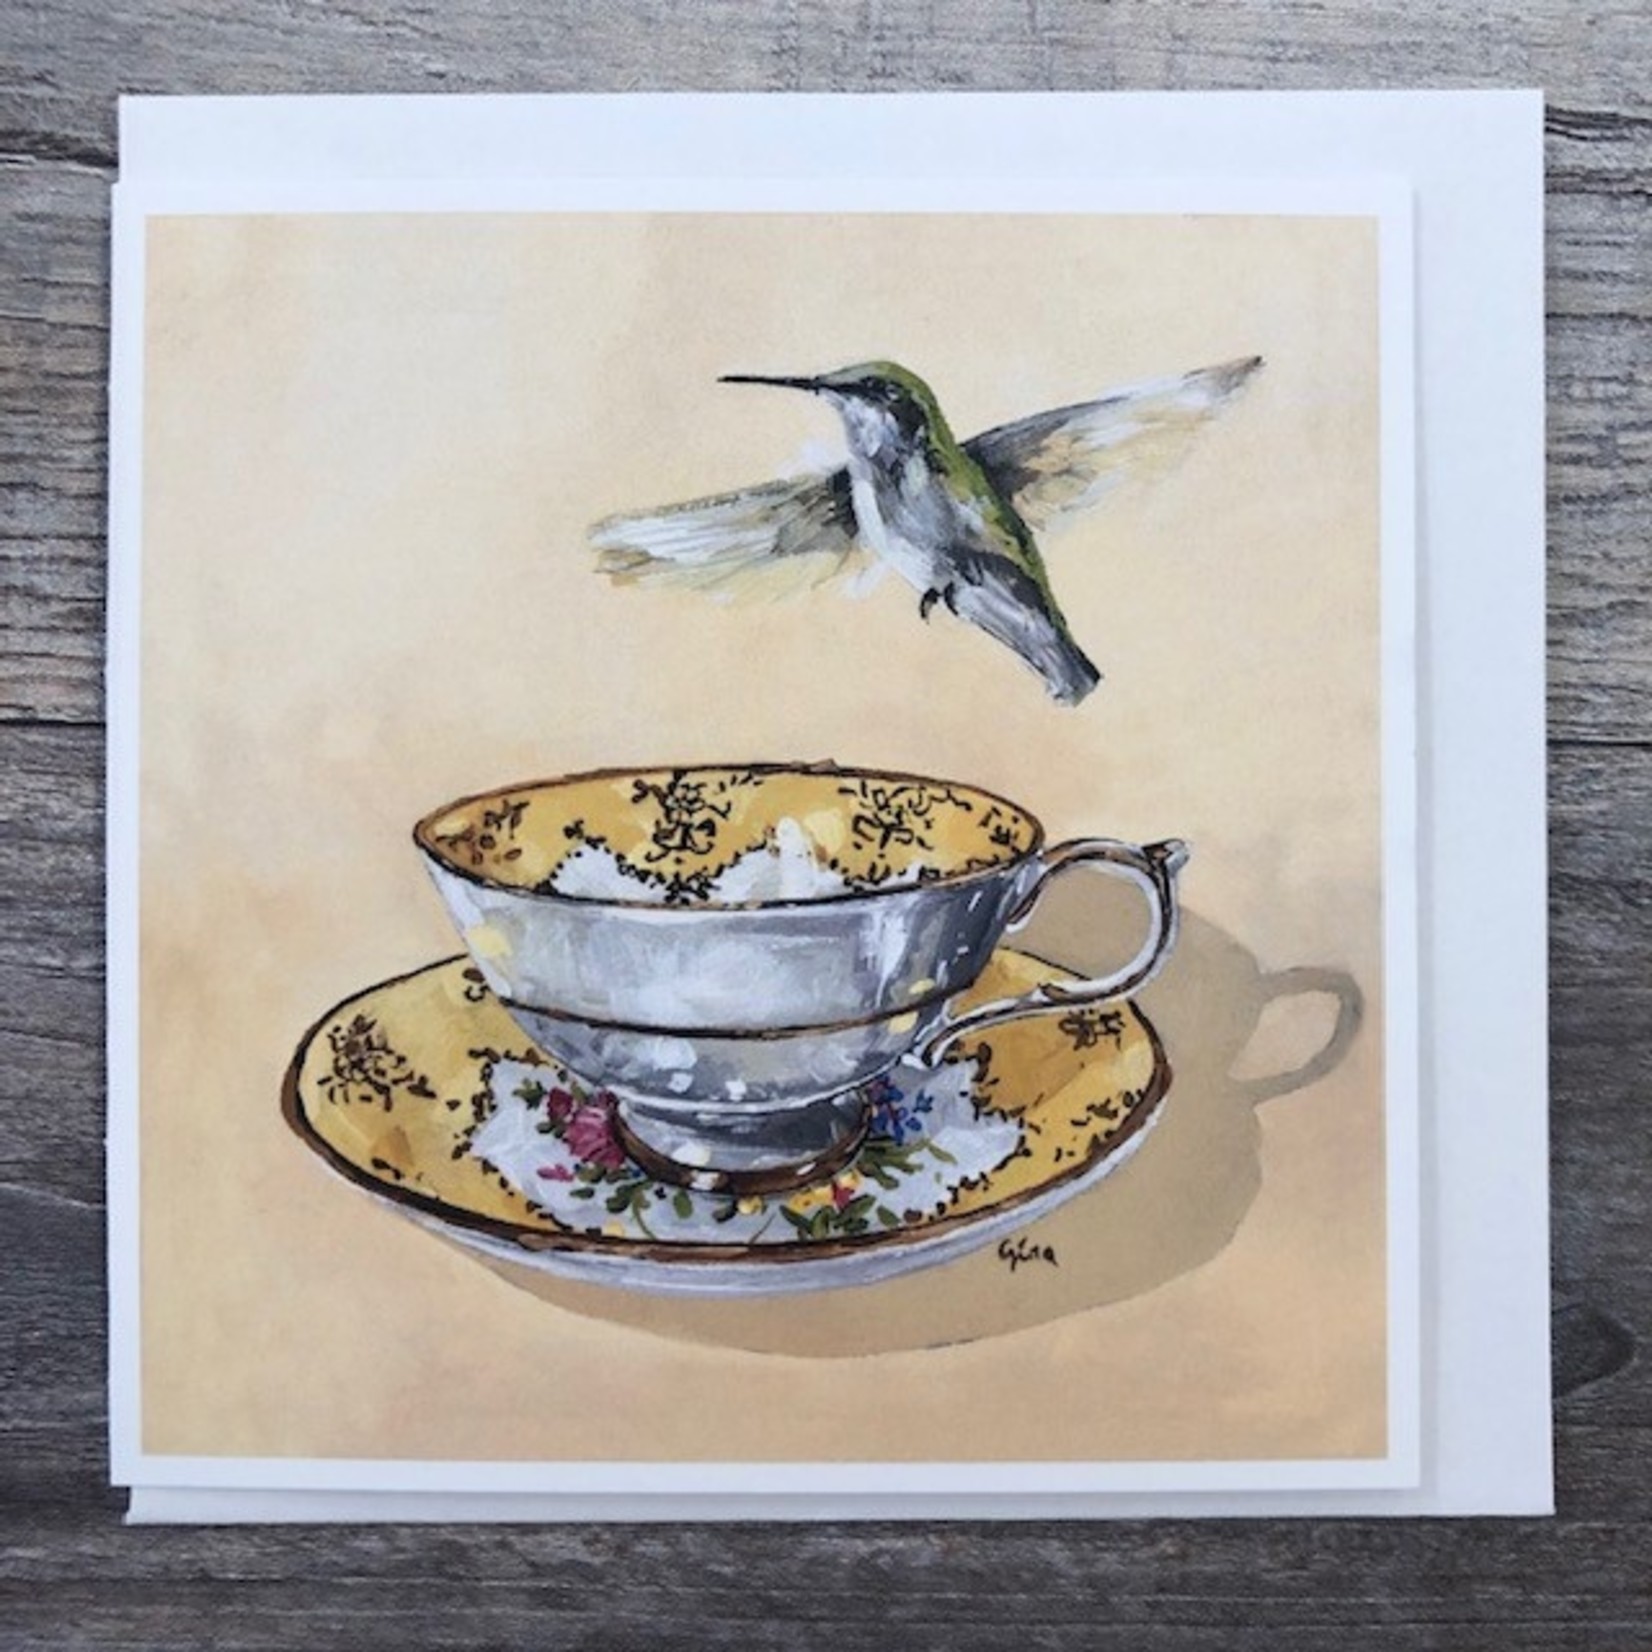 Birds on a Cup Greeting Card - Hummingbird Gold Antique